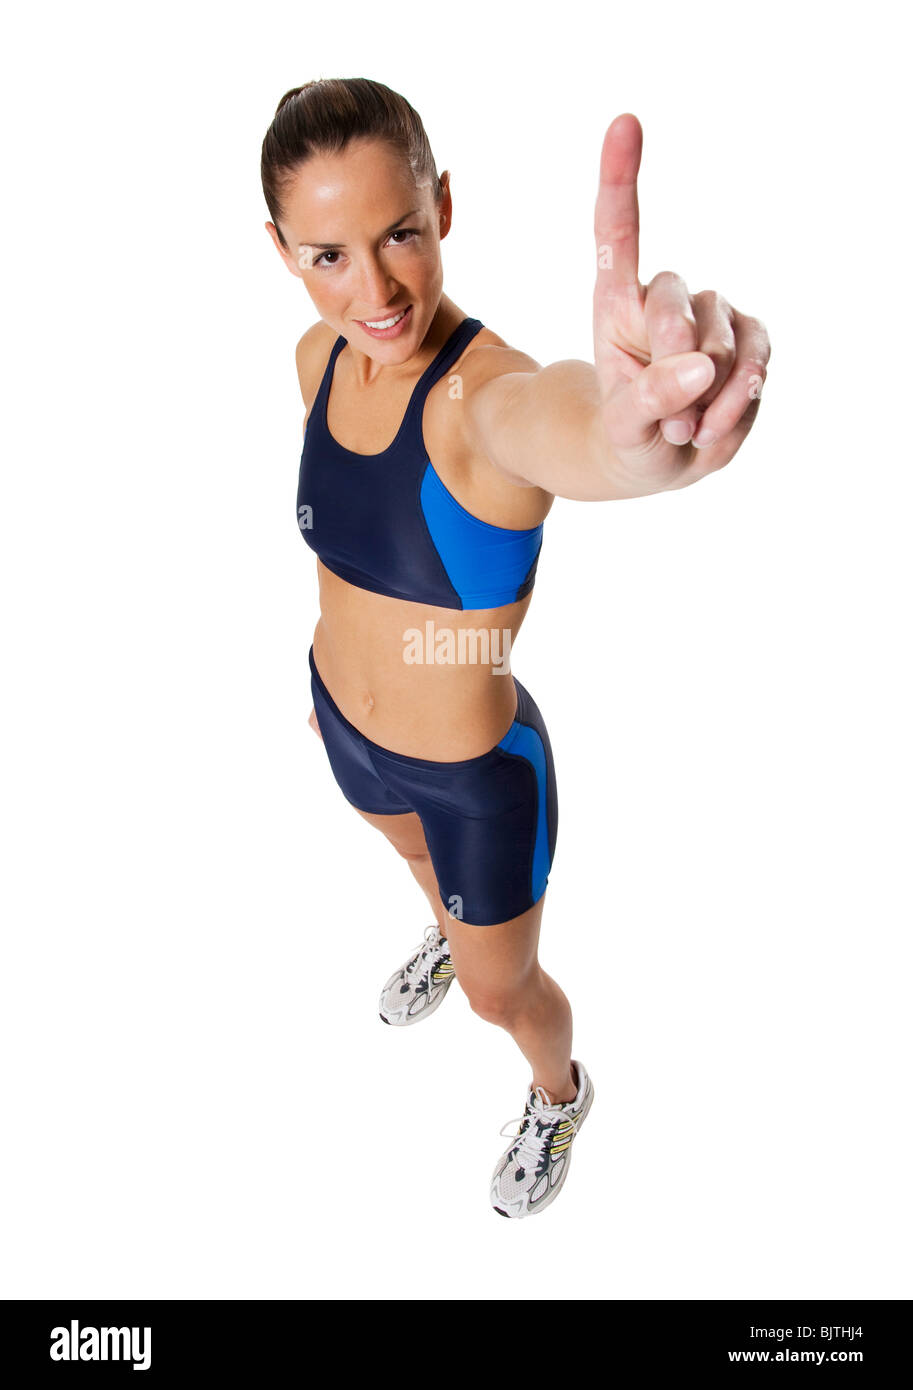 Woman athlete holding medal and making hand gesture Stock Photo